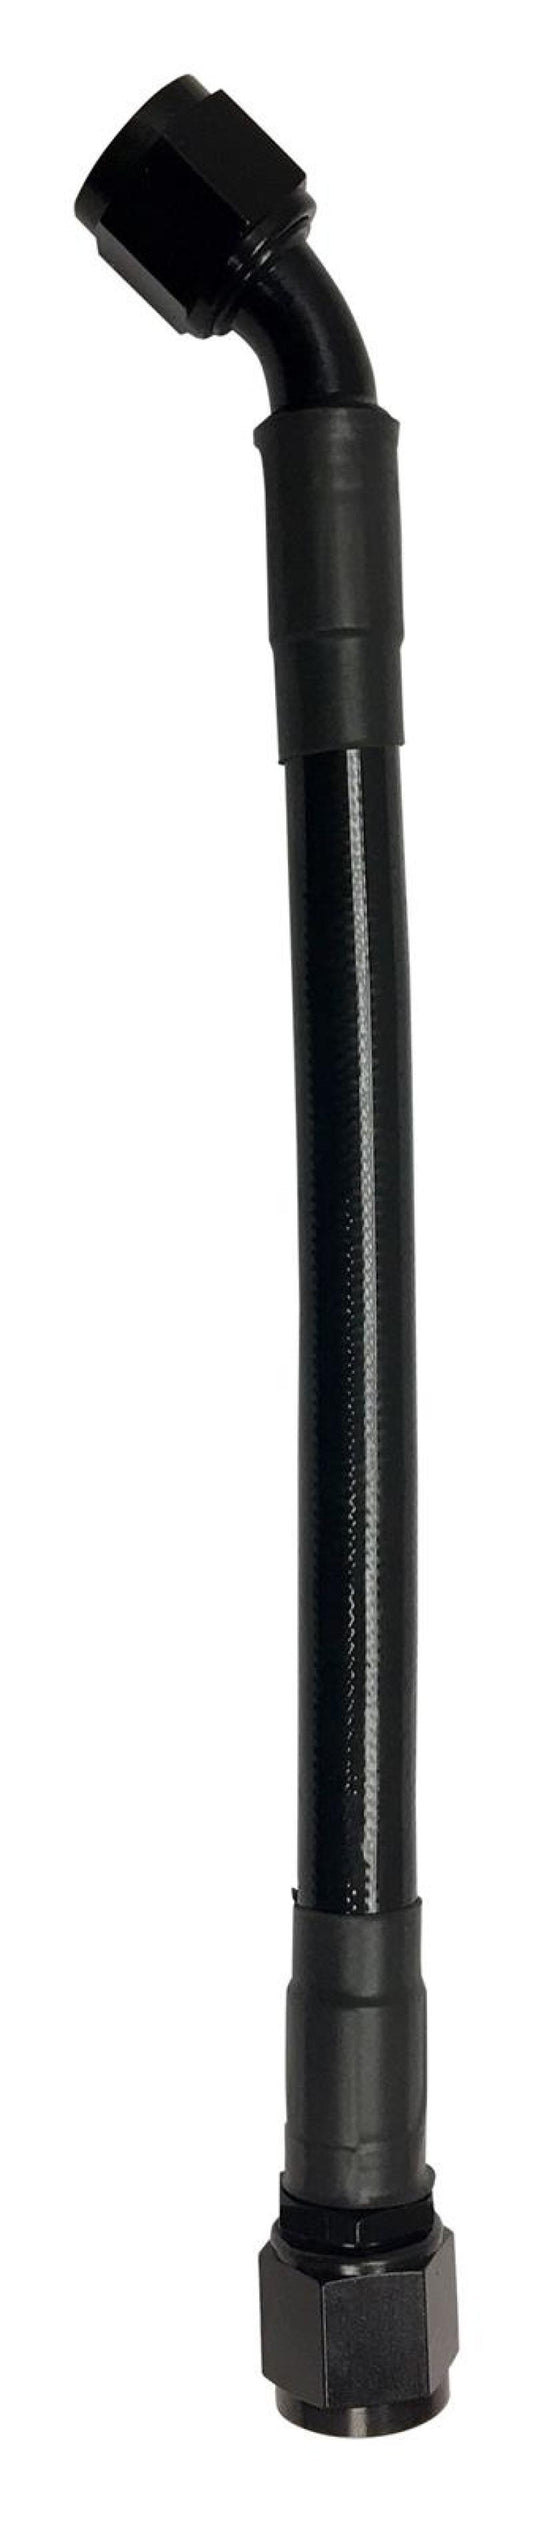 Fragola -10AN Ext Black PTFE Hose Assembly Straight x 45 Degree 84in